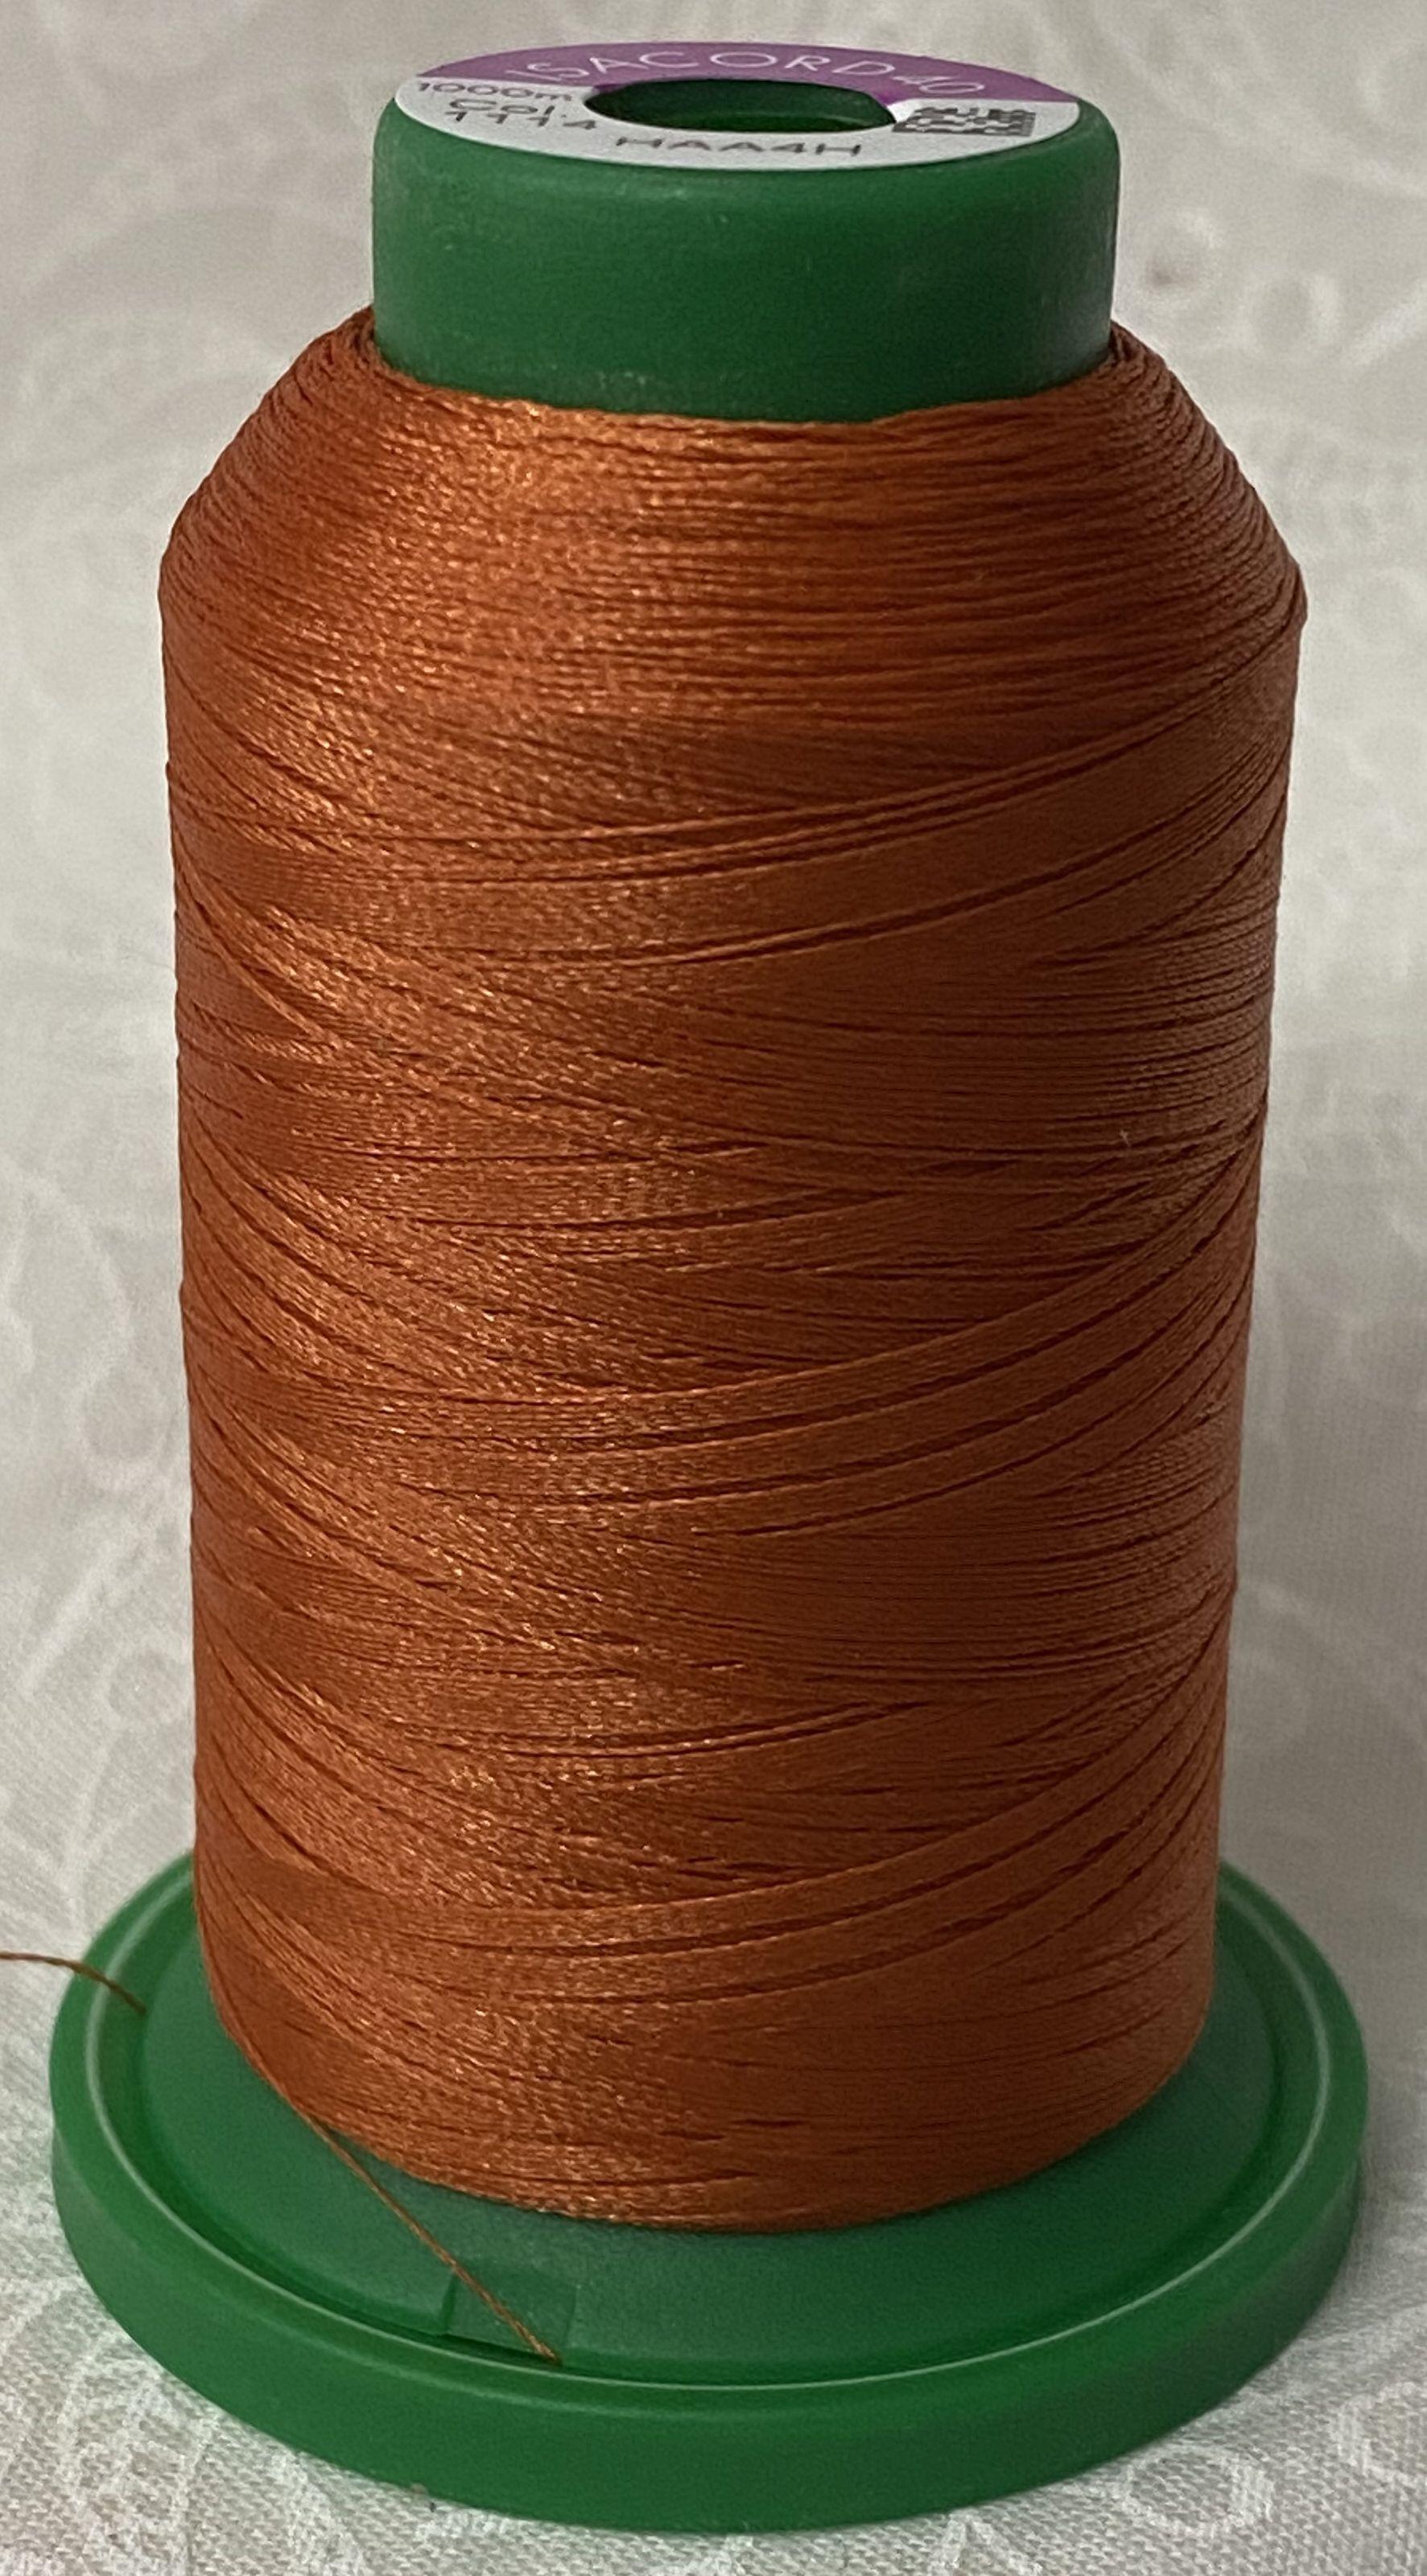 ISACORD 40 #1114 CLAY 1000m Machine Embroidery Sewing Thread